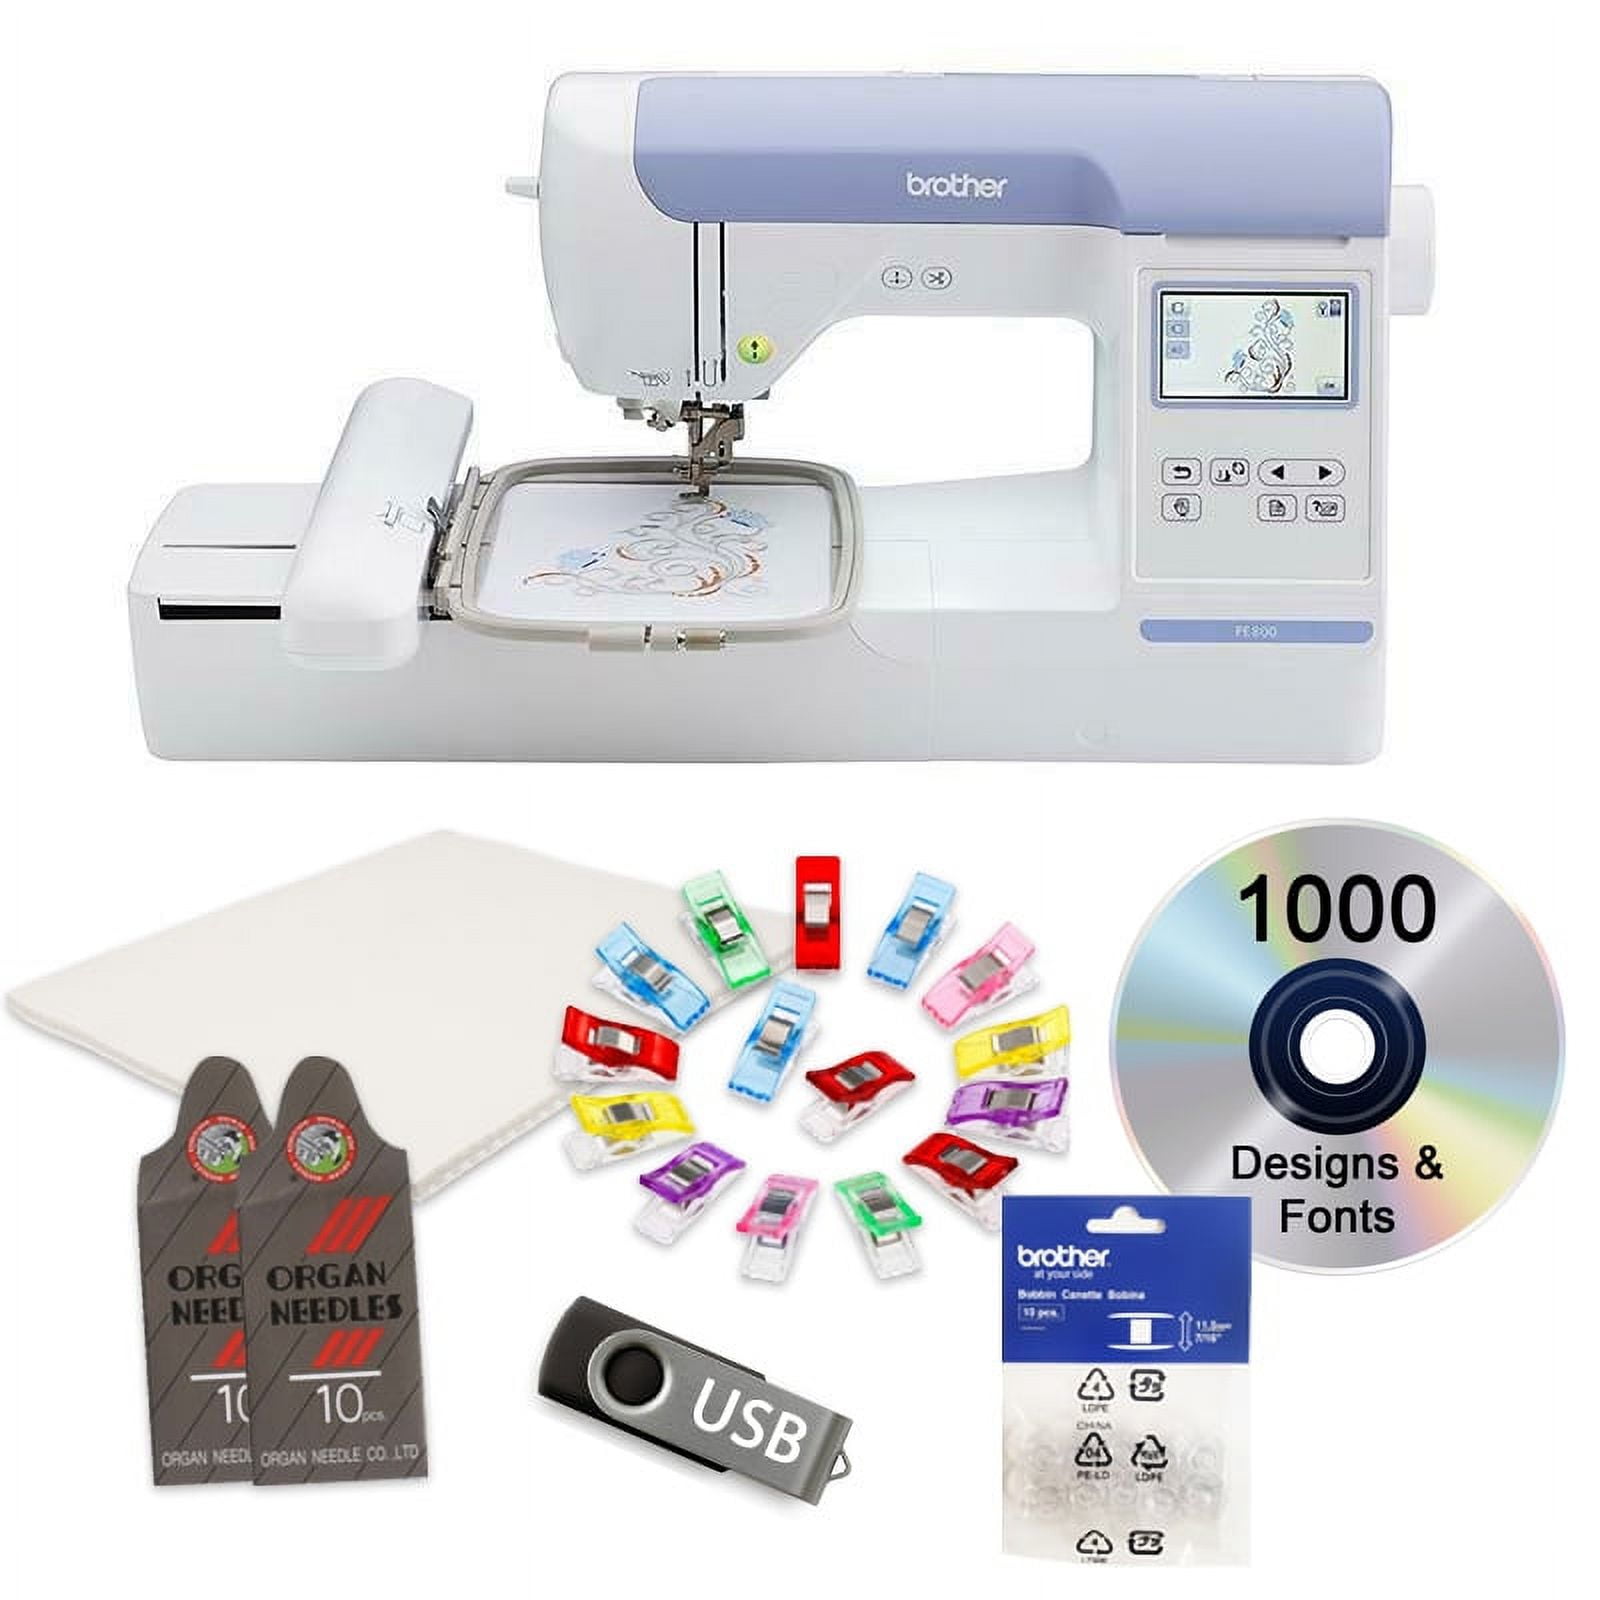 BROTHER PE800 5x7 Embroidery Machine with Large Color Touch Screen New  Open Box